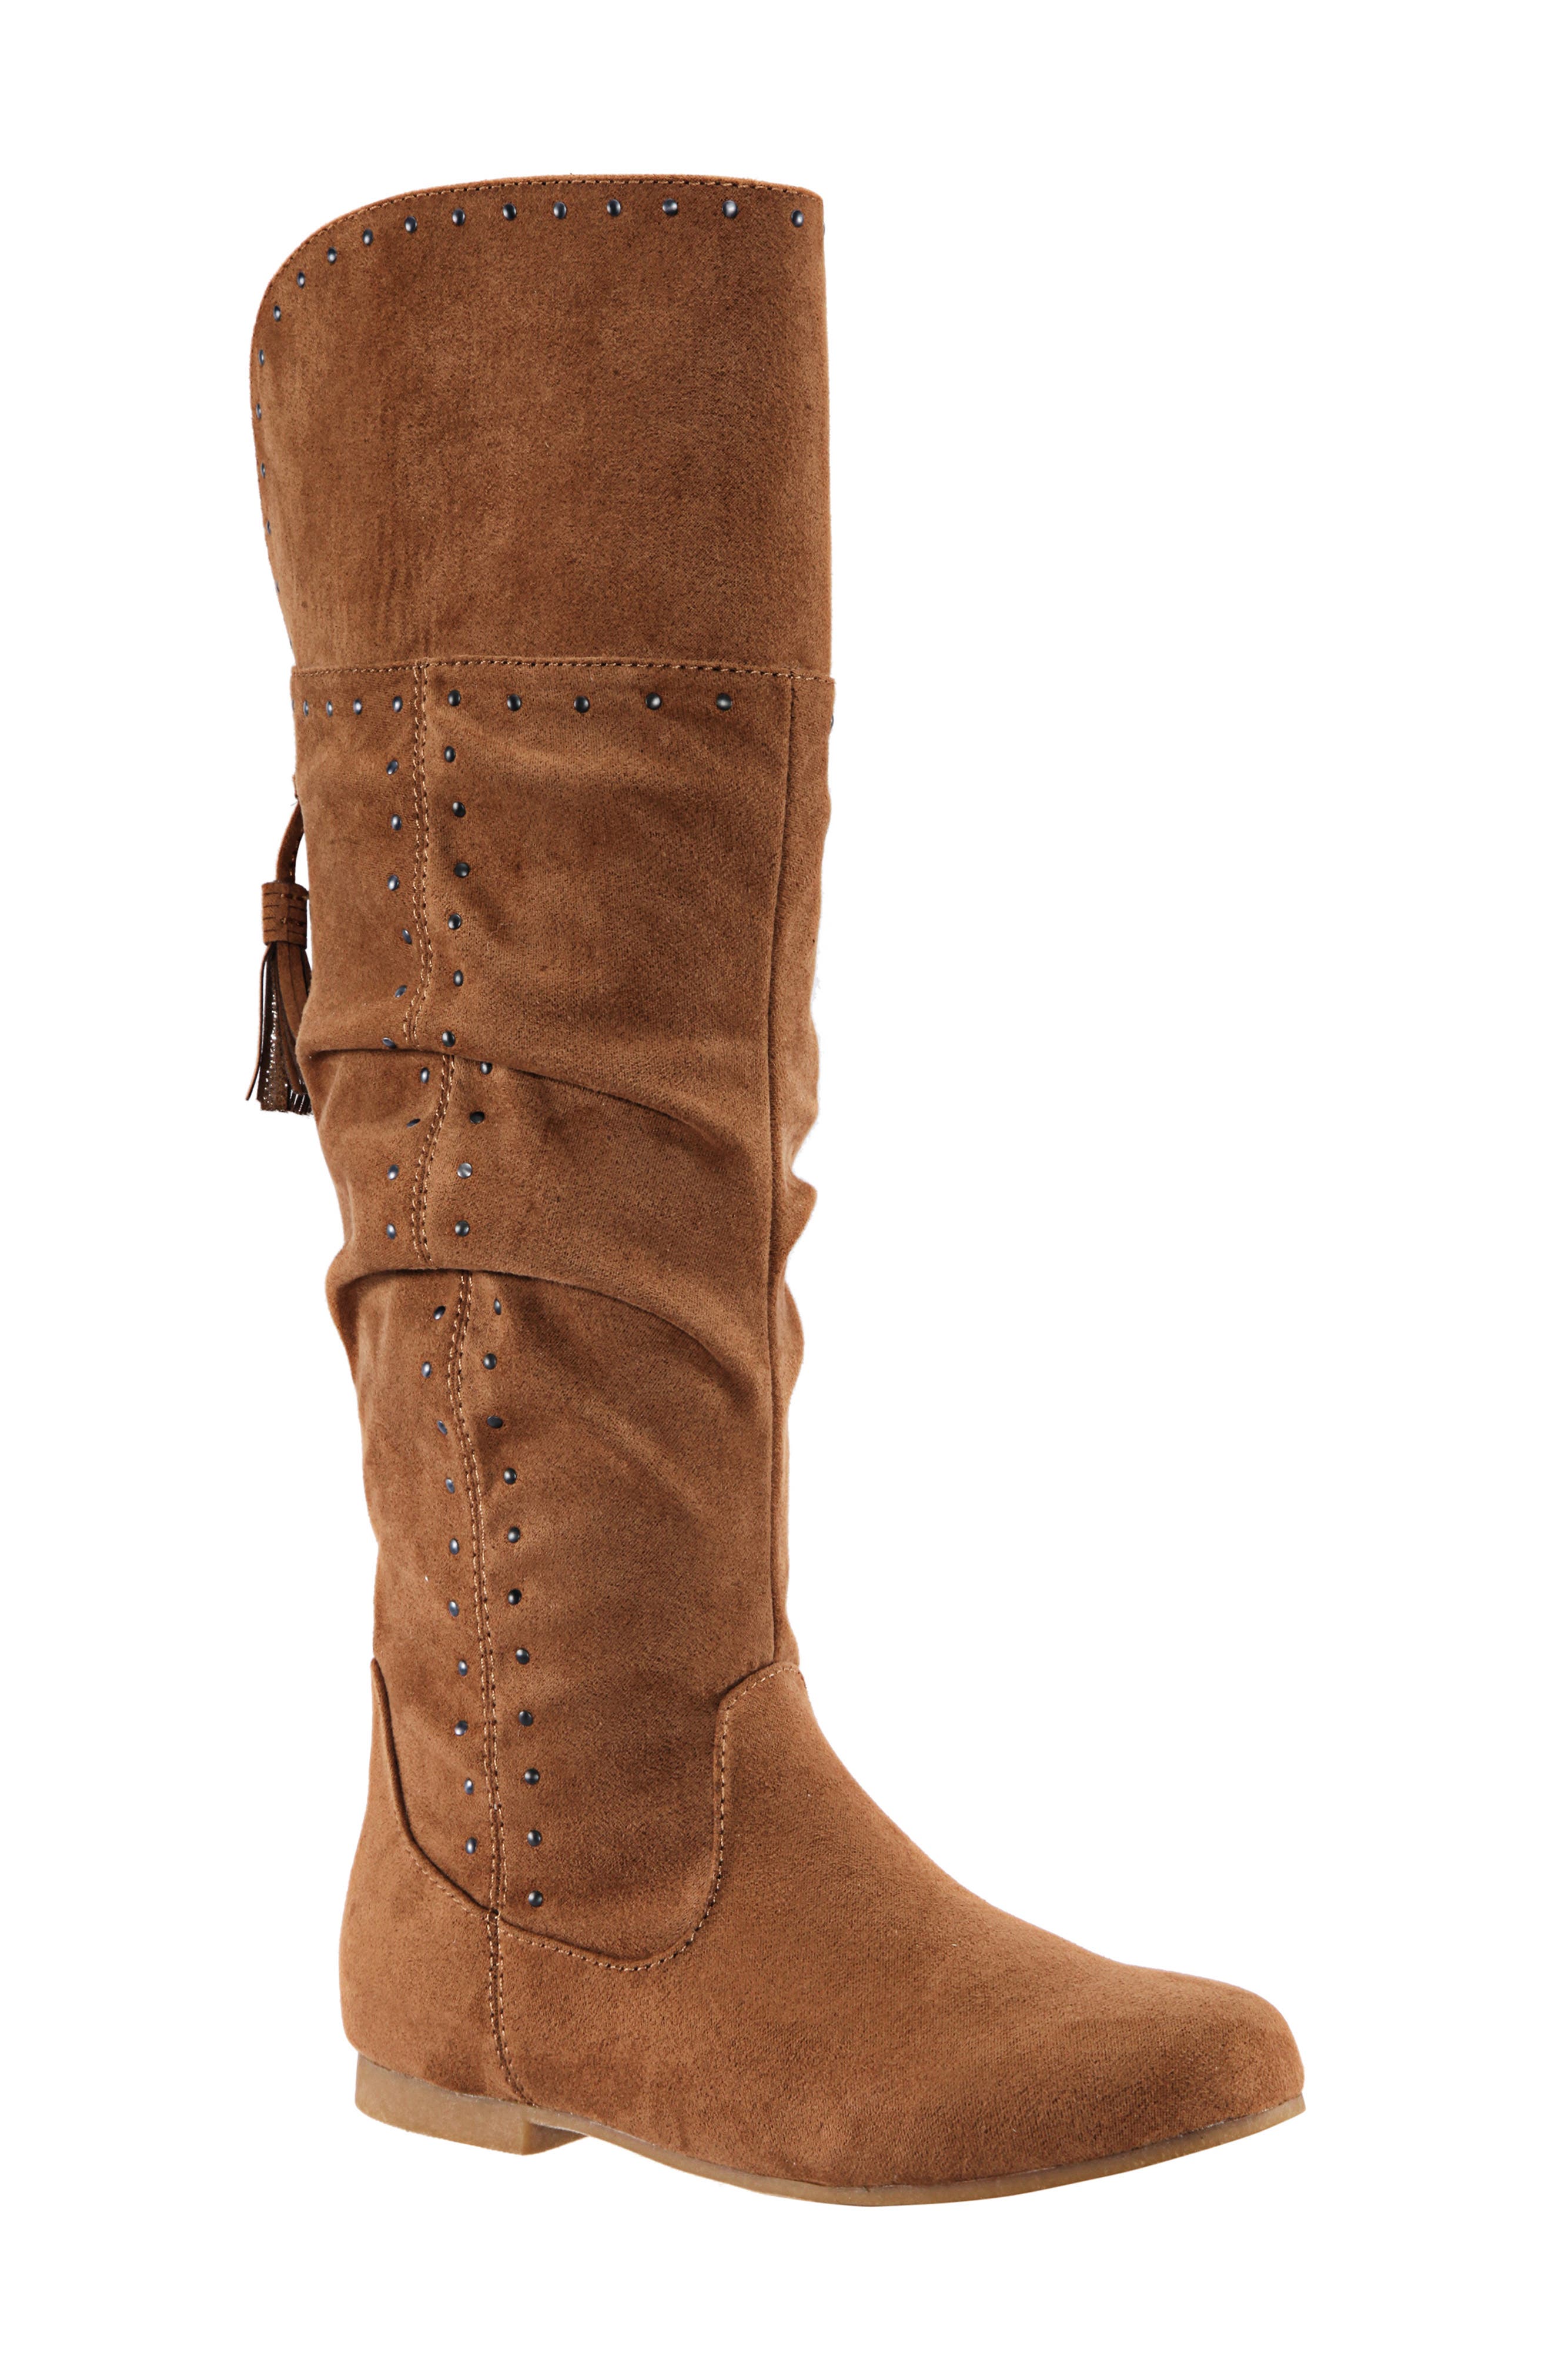 UPC 794378366911 product image for Girl's Nina Gem Slouchy Studded Boot, Size 1 M - Brown | upcitemdb.com